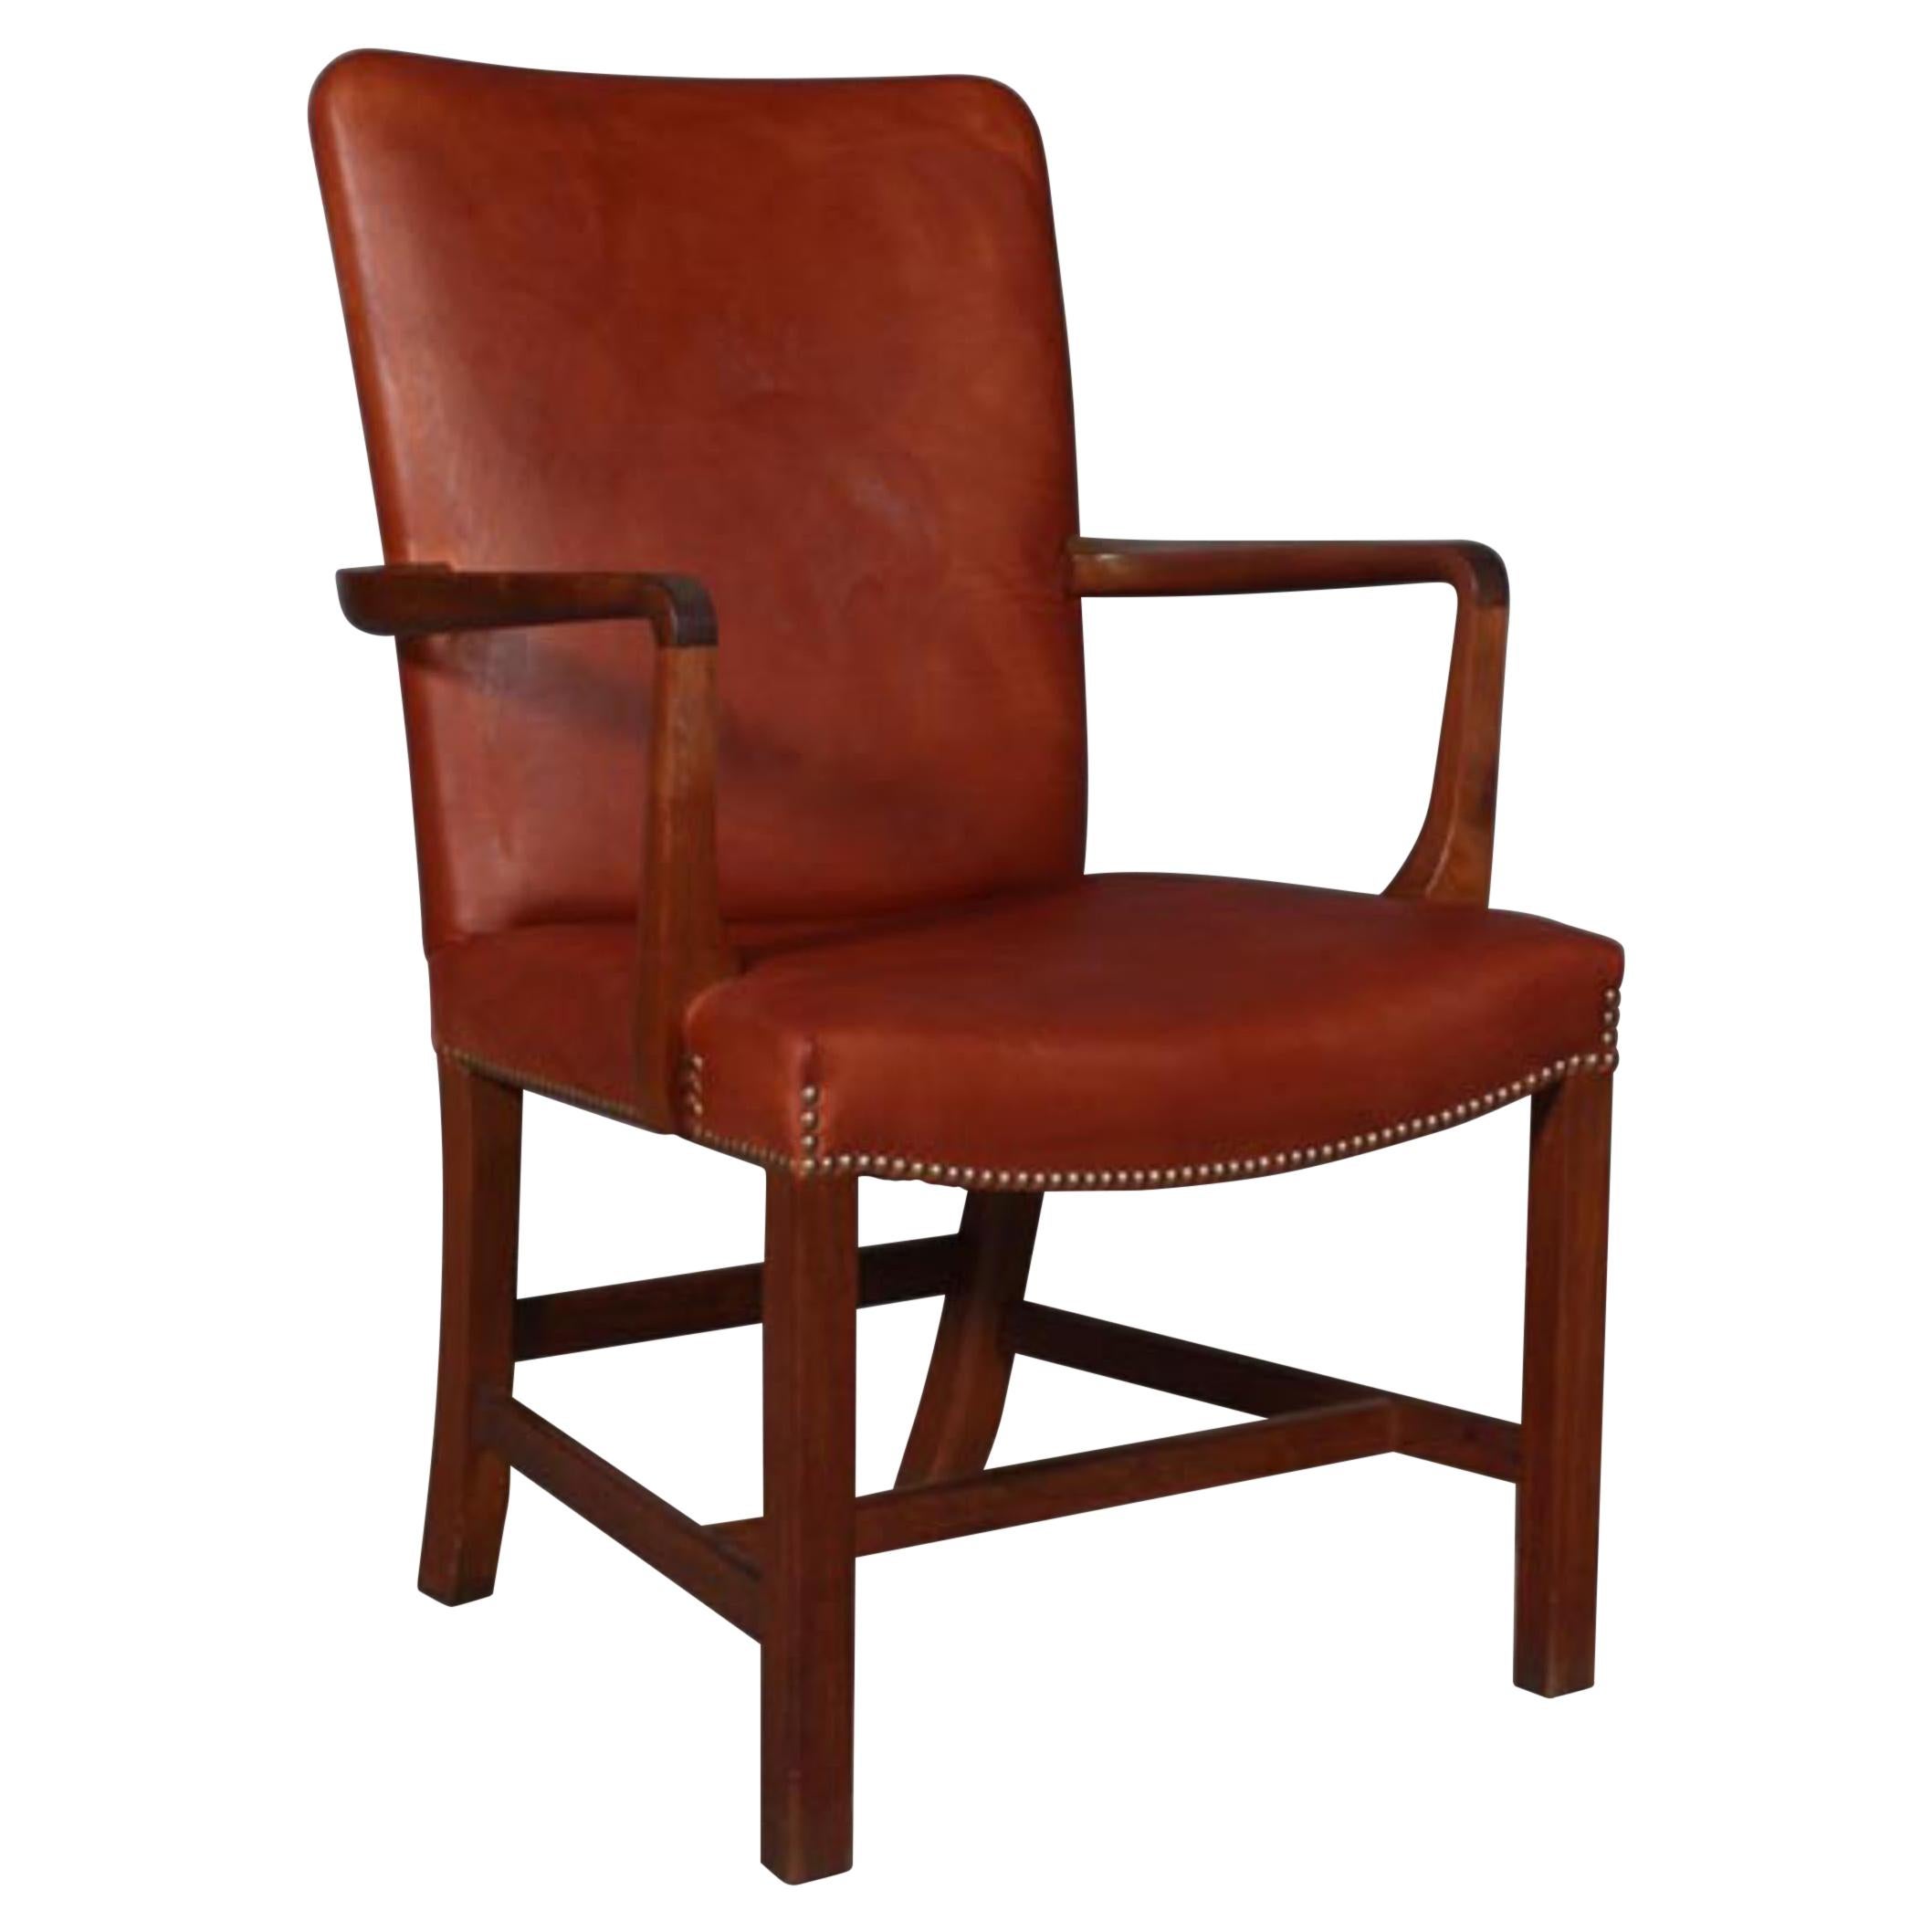 Kaare Klint "Nørrevold" Armchair in mahogany and leather